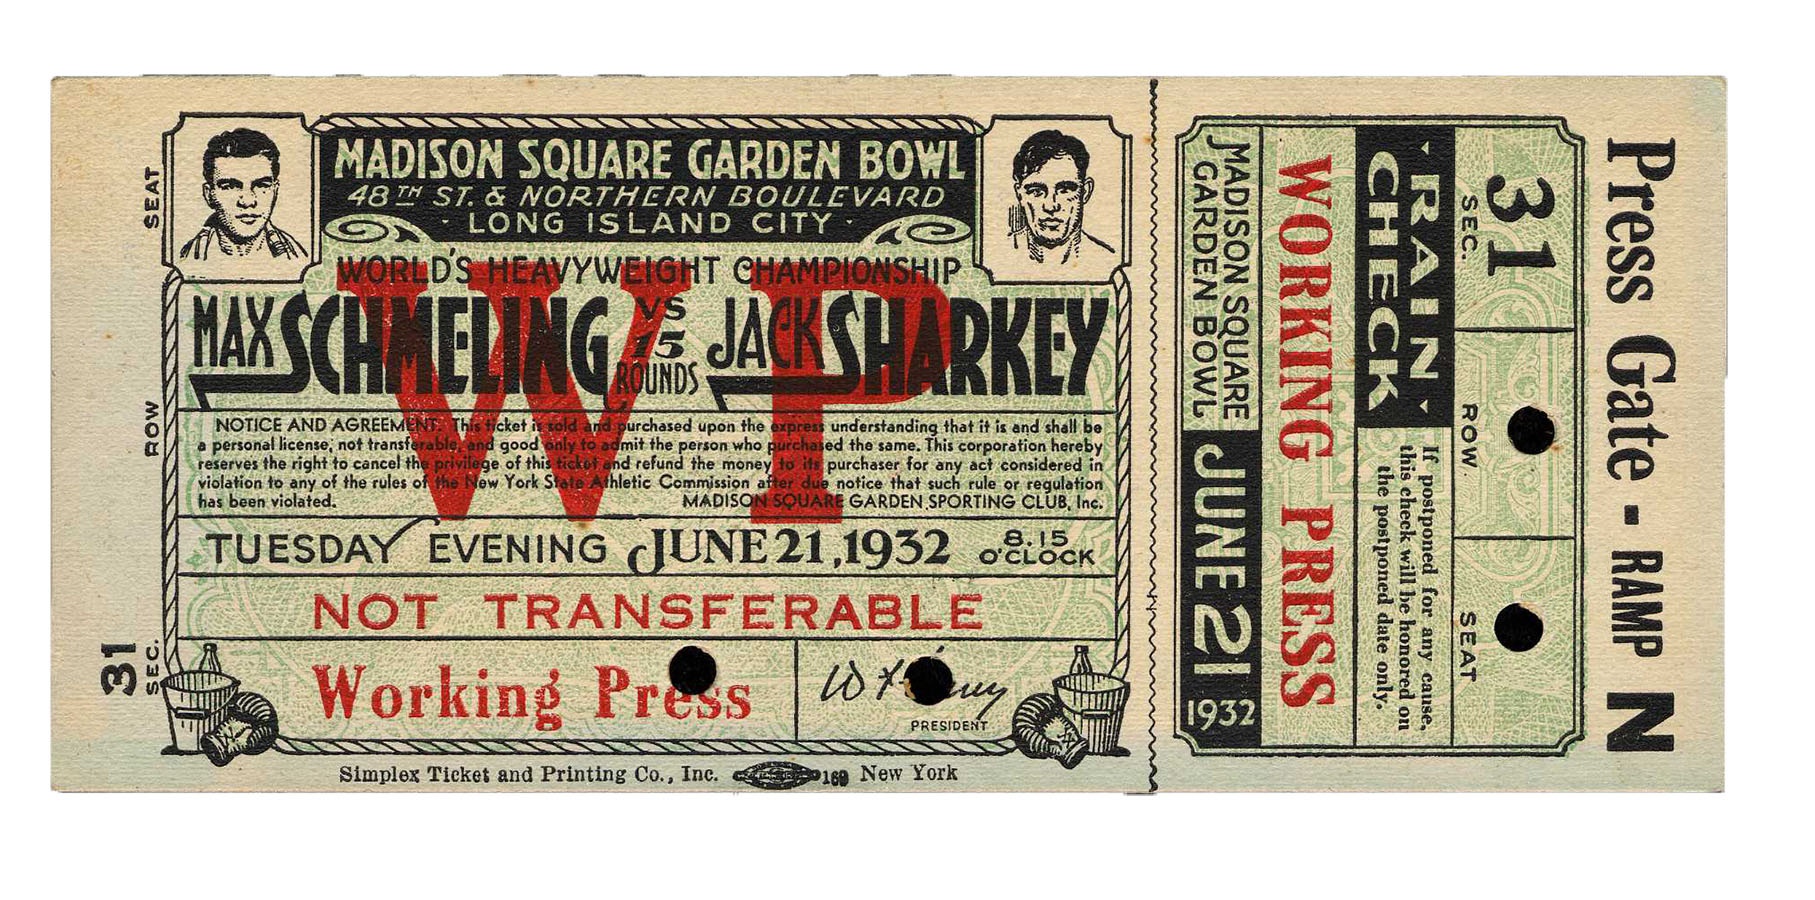 The Mark Mausner Boxing Collection - Schmeling-Sharkey Full Ticket (1932)